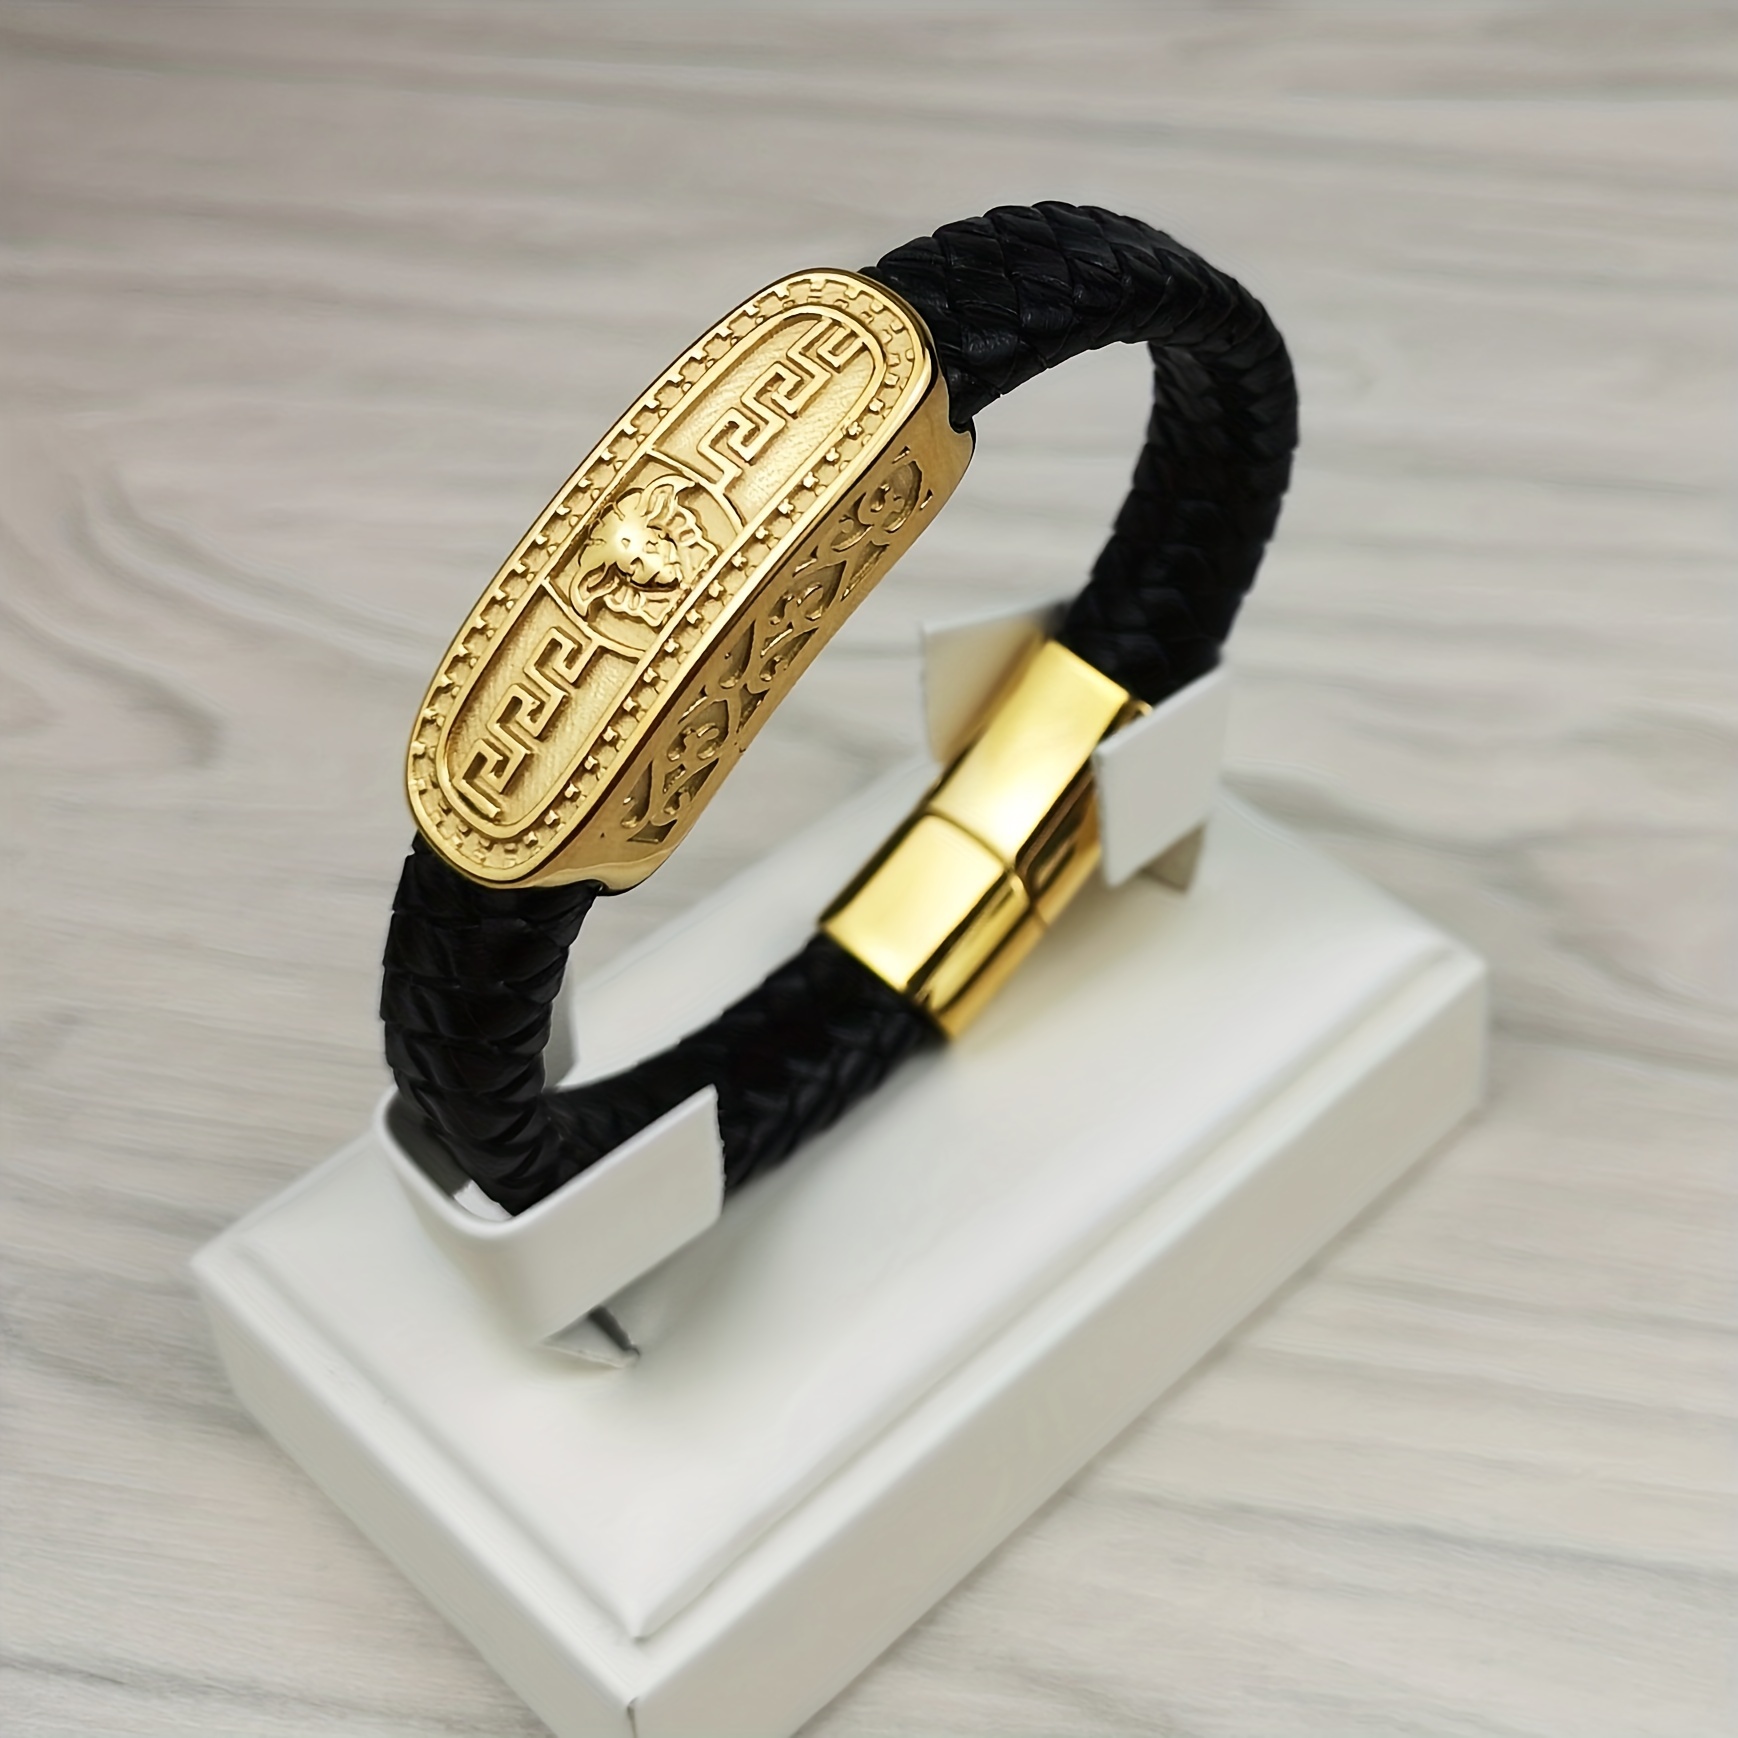 24K Gold Color Mens Dragon Patterned Bracelet High Quality Hip hop Iced Out  Male Jewelry Dubai Gift